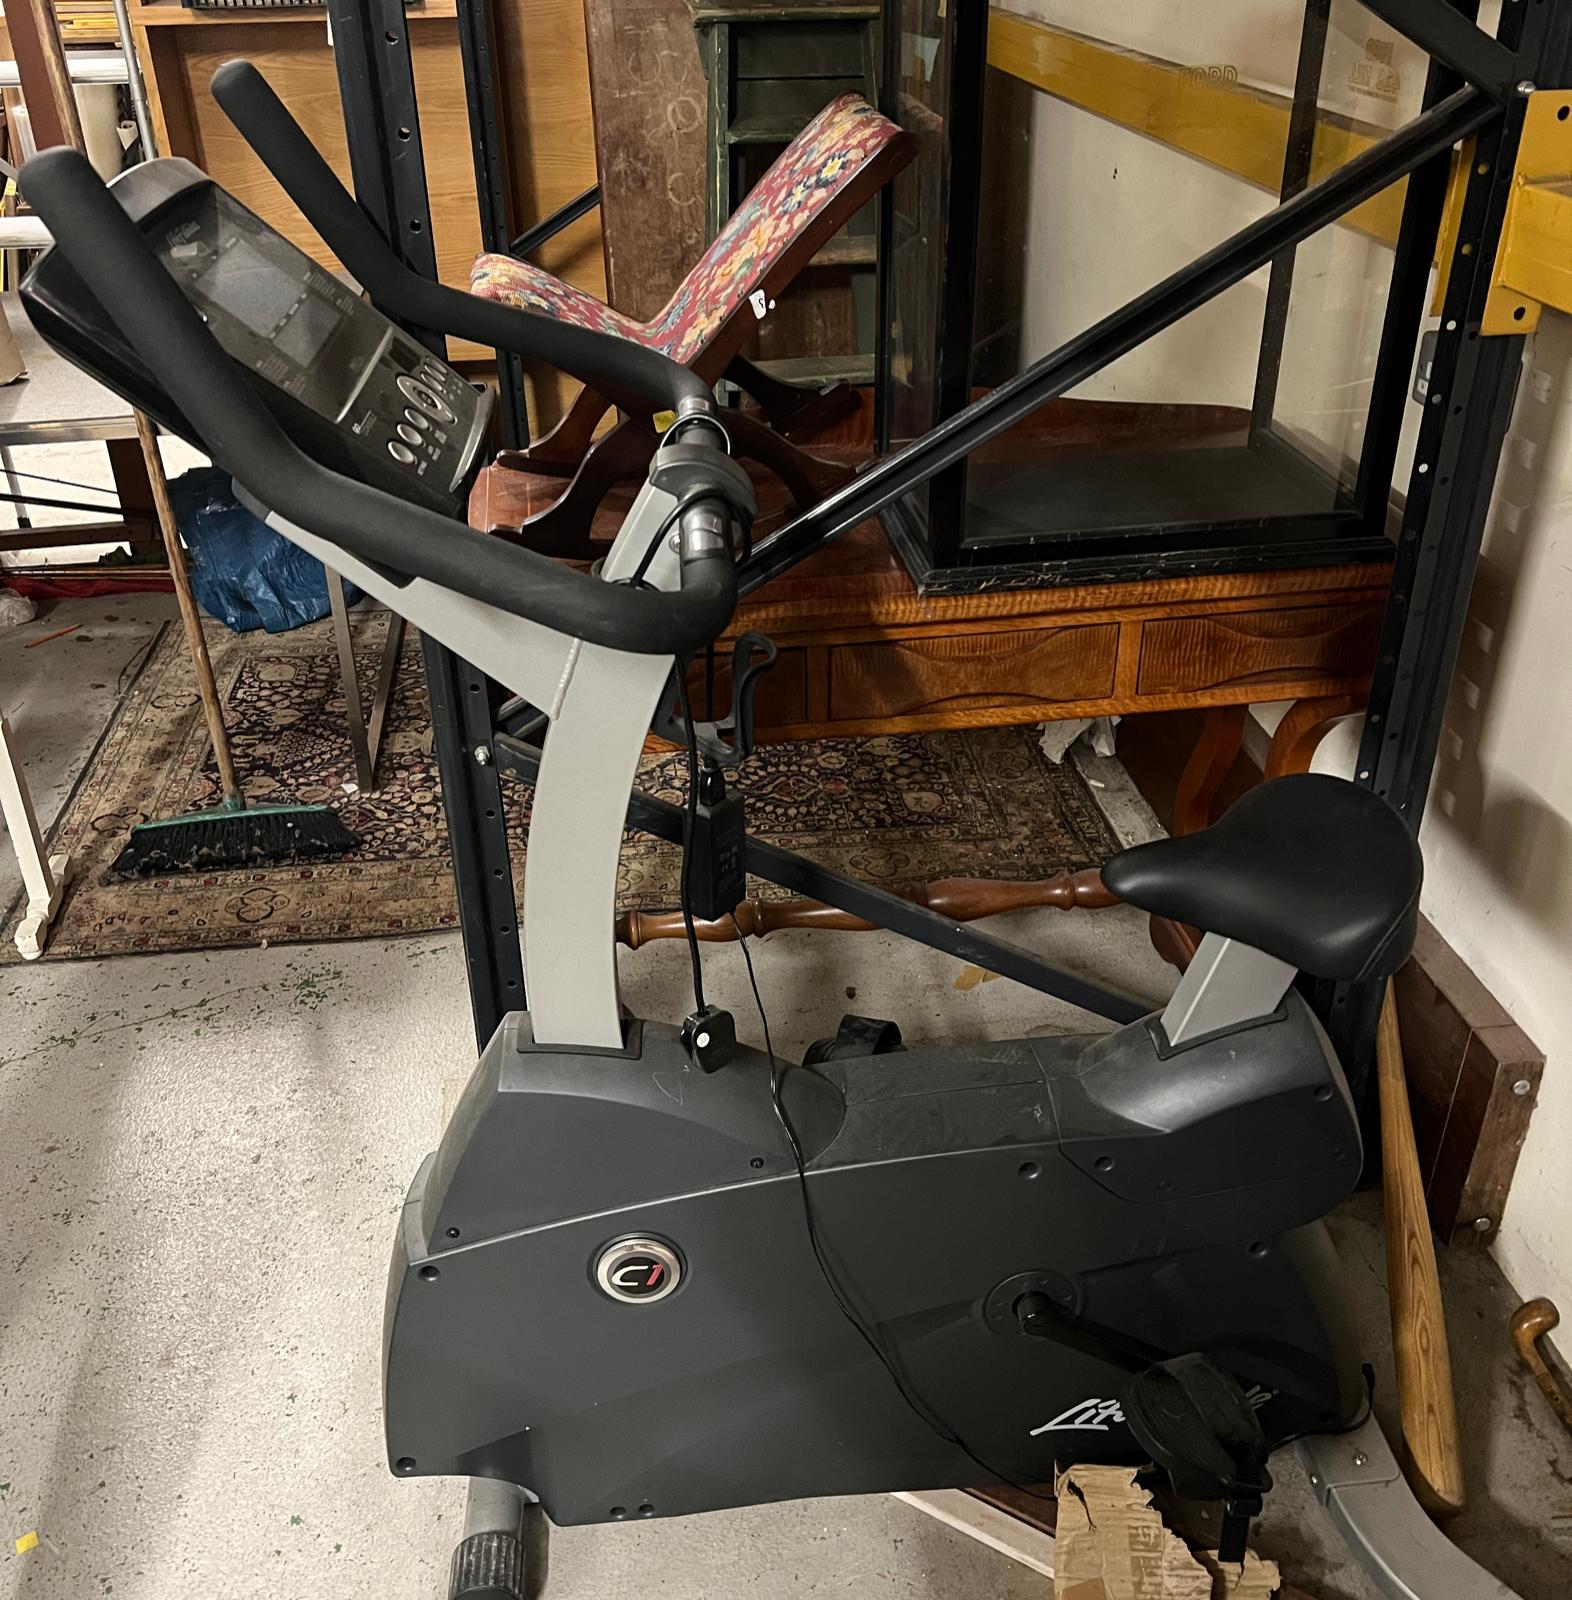 A Life Fitness C1 exercise bike with Go Console